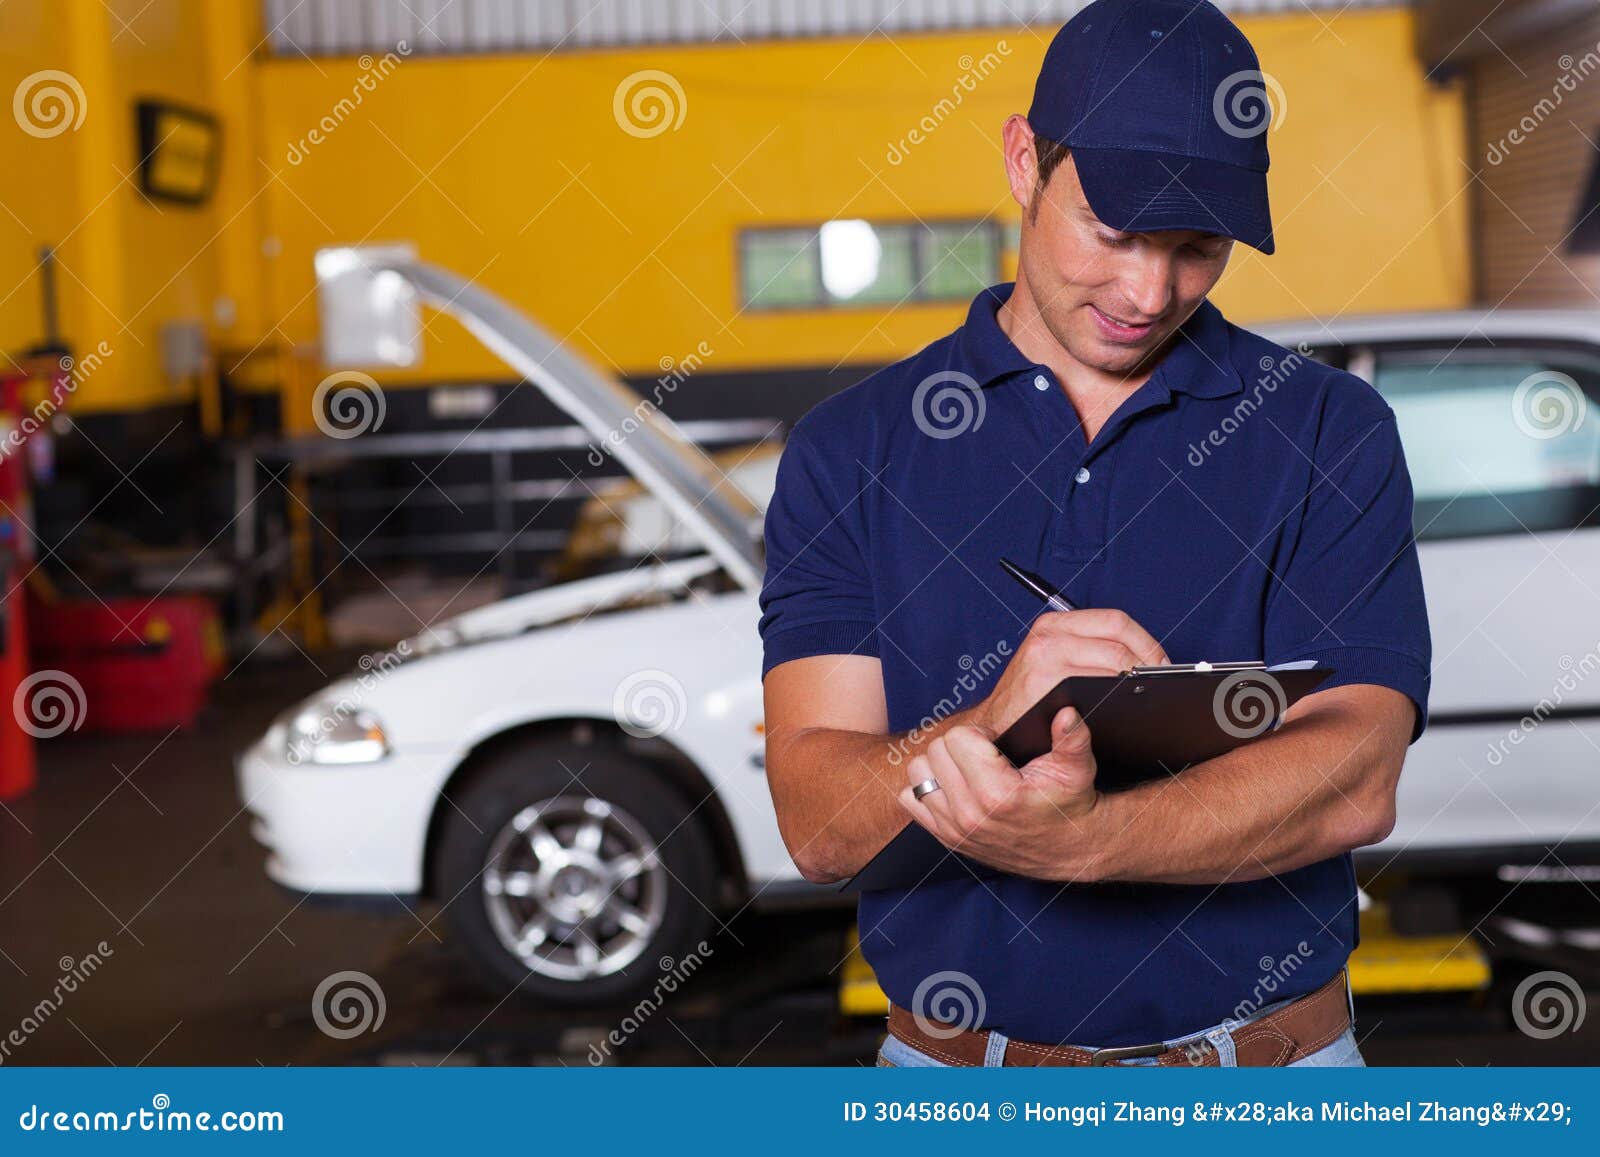 Auto Workshop Manager Stock Images - Image: 30458604